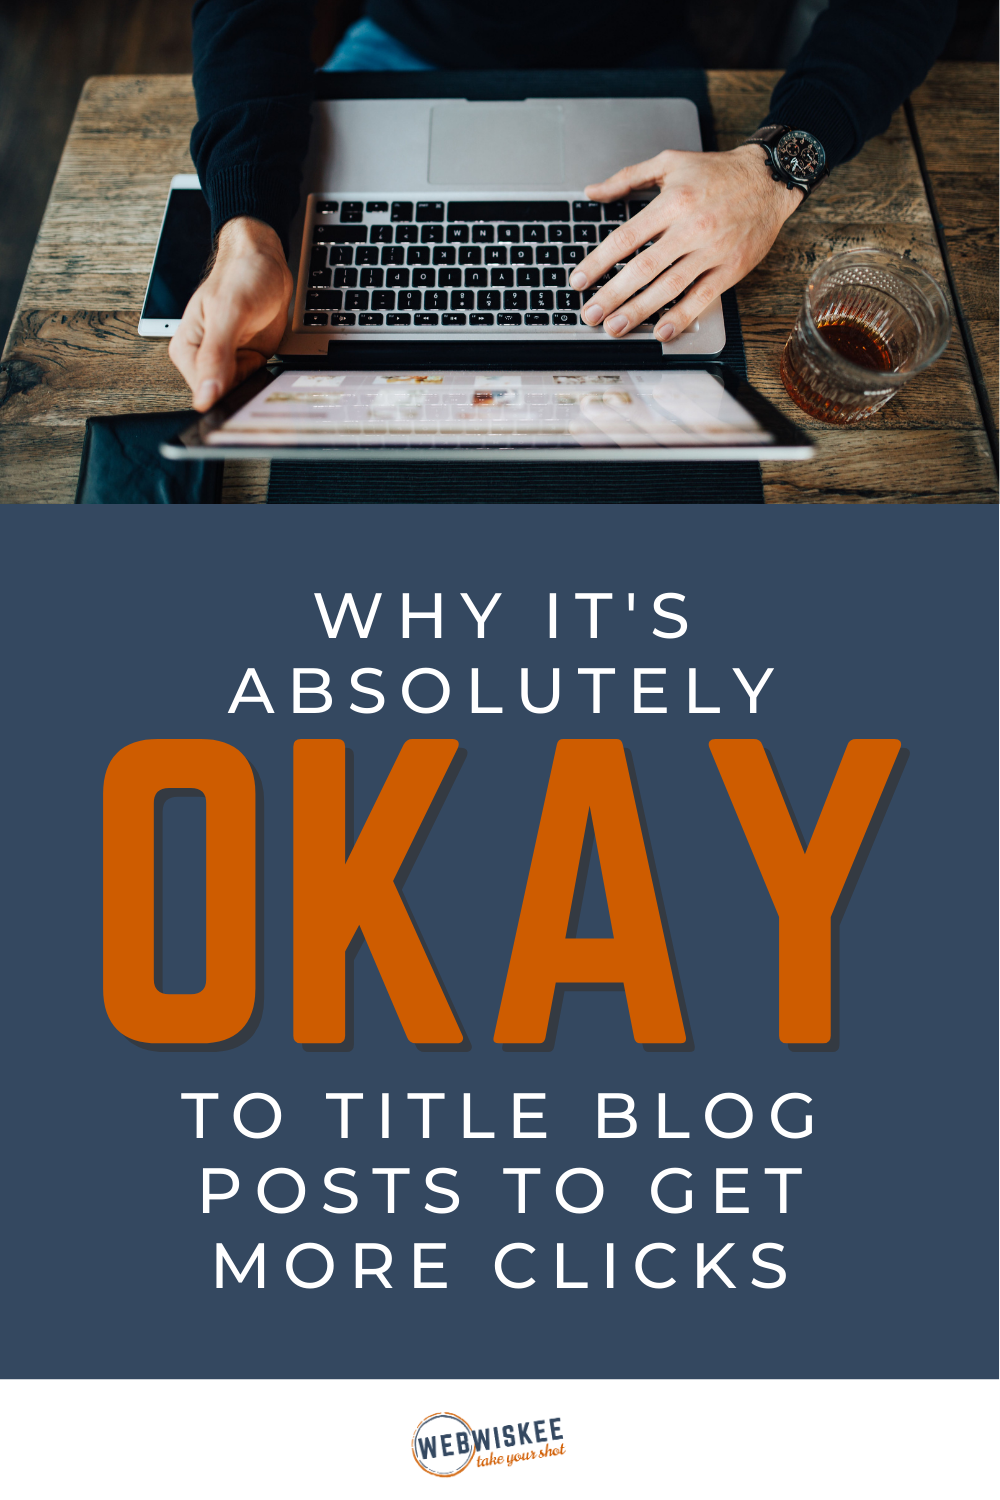 Why It's Absolutely Okay to Title Blog Posts to Get More Clicks by WebWiskee